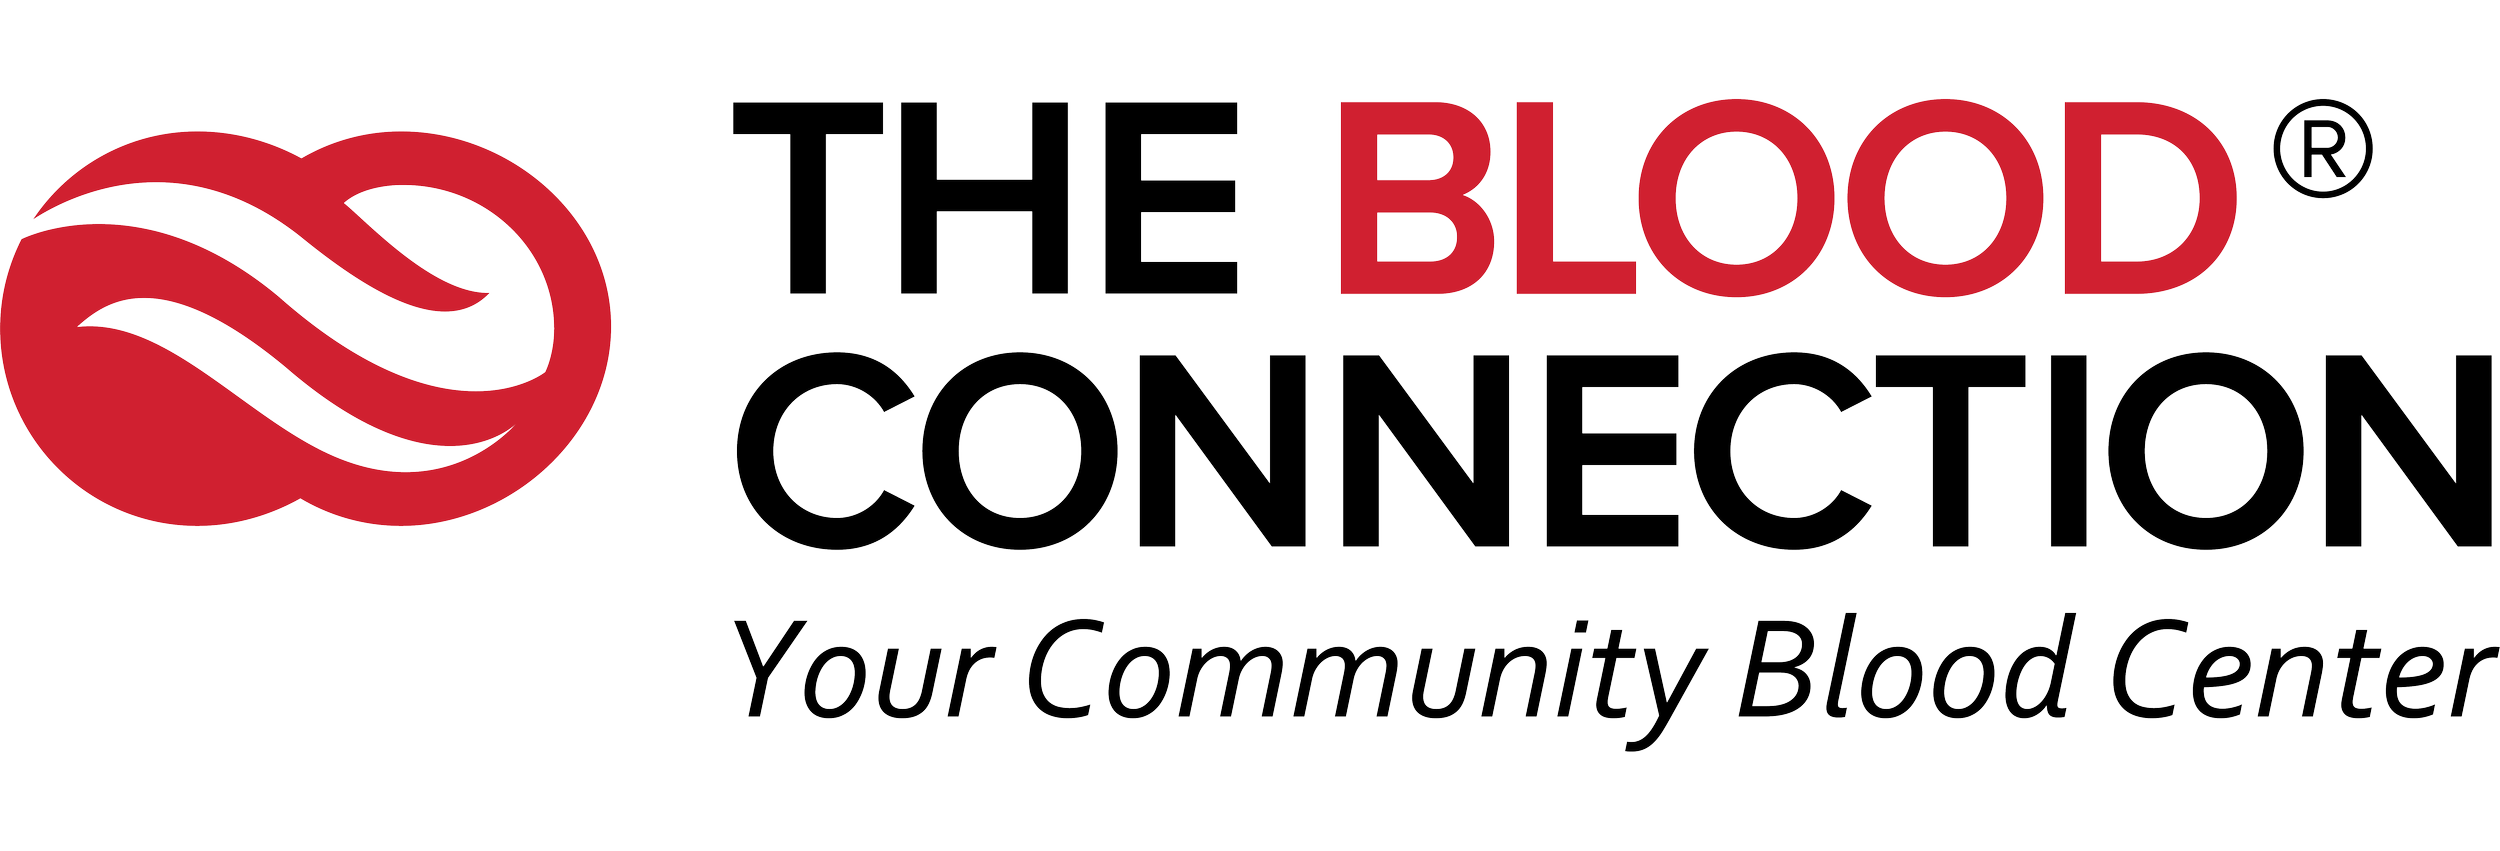 blood connection logo.png